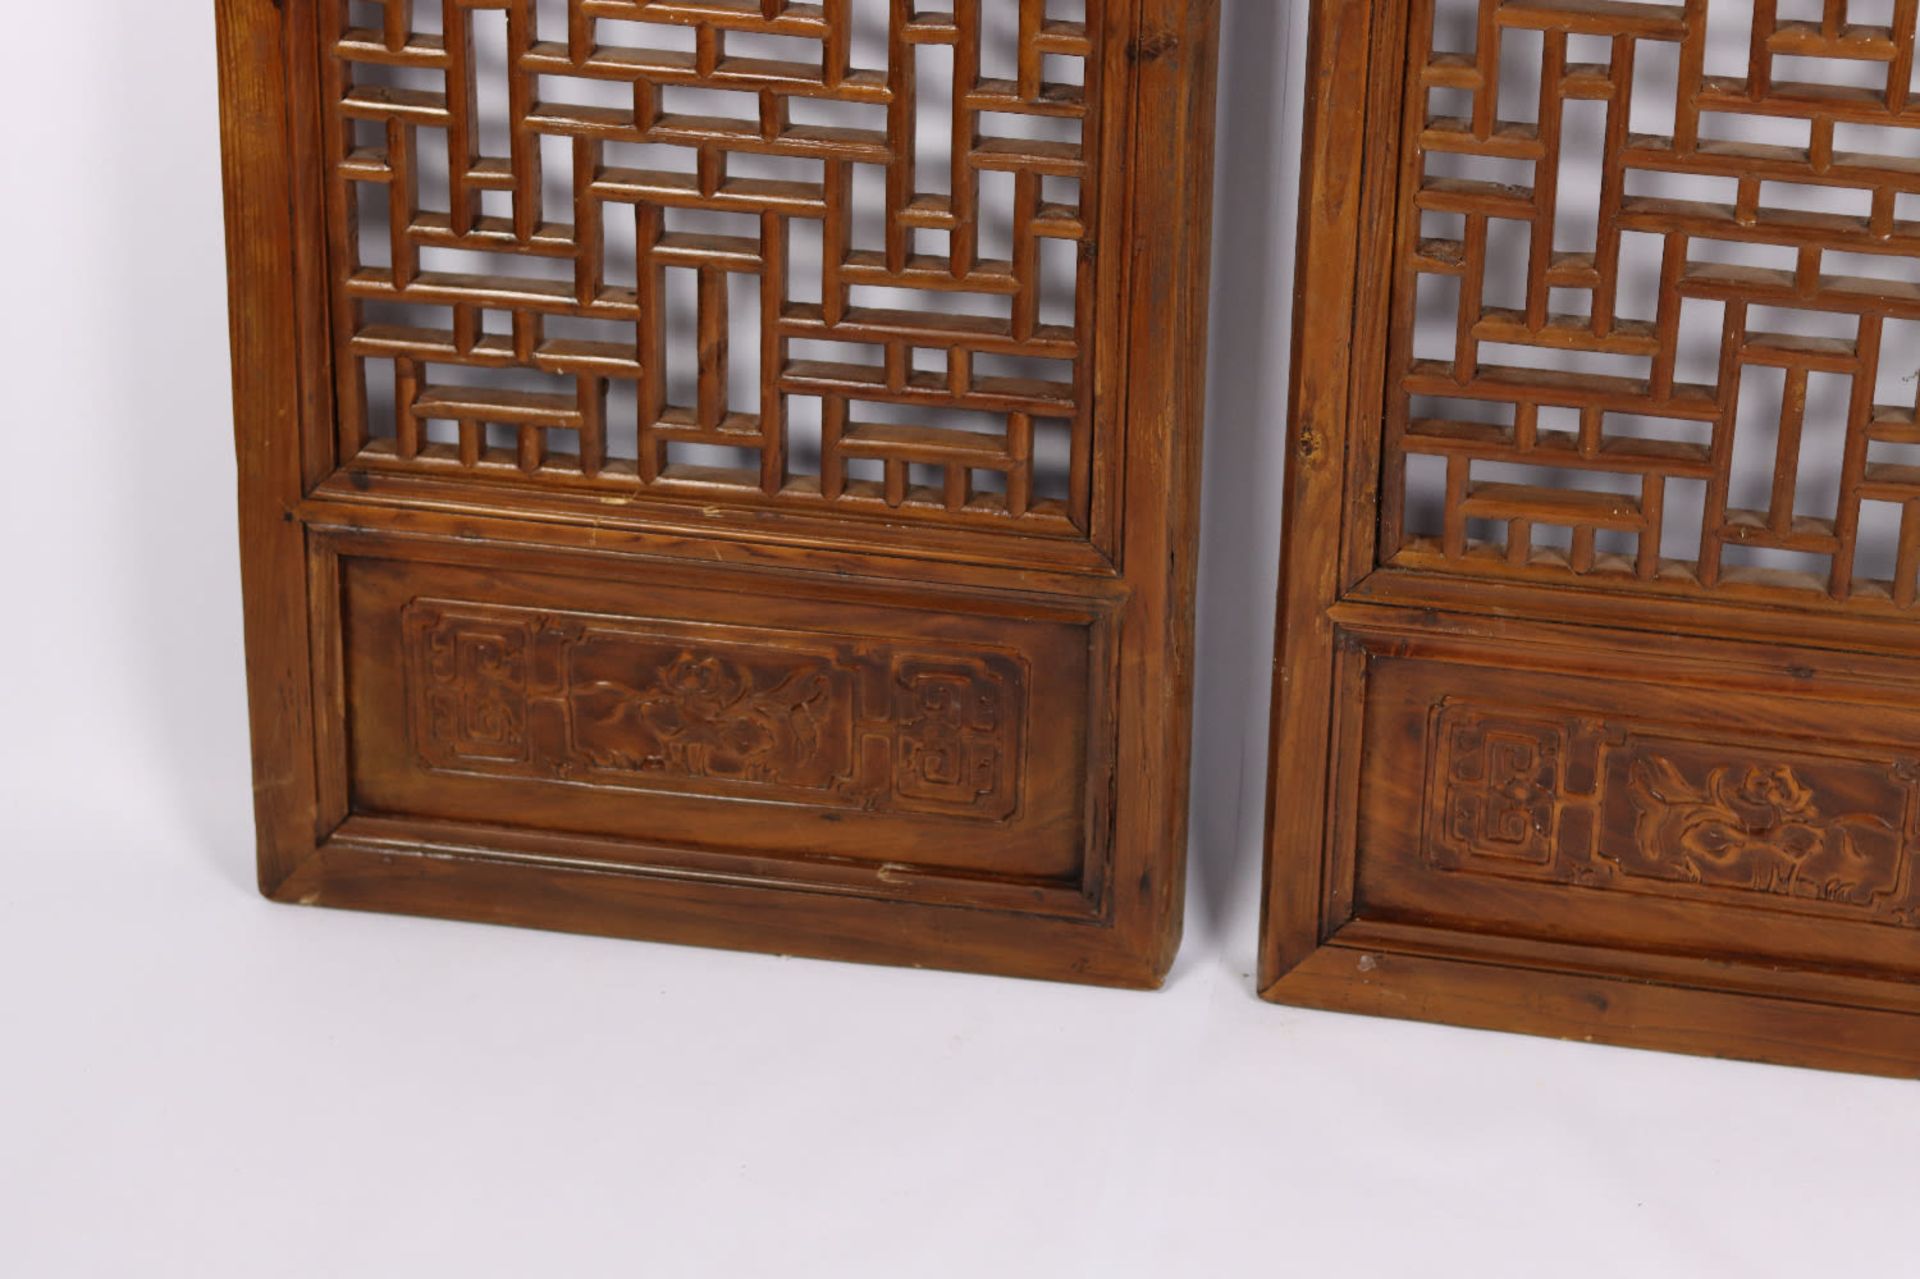 A pair of Chinese fretwork screens with carved motifs. Qing Dynasty, 19th Century - Image 4 of 4